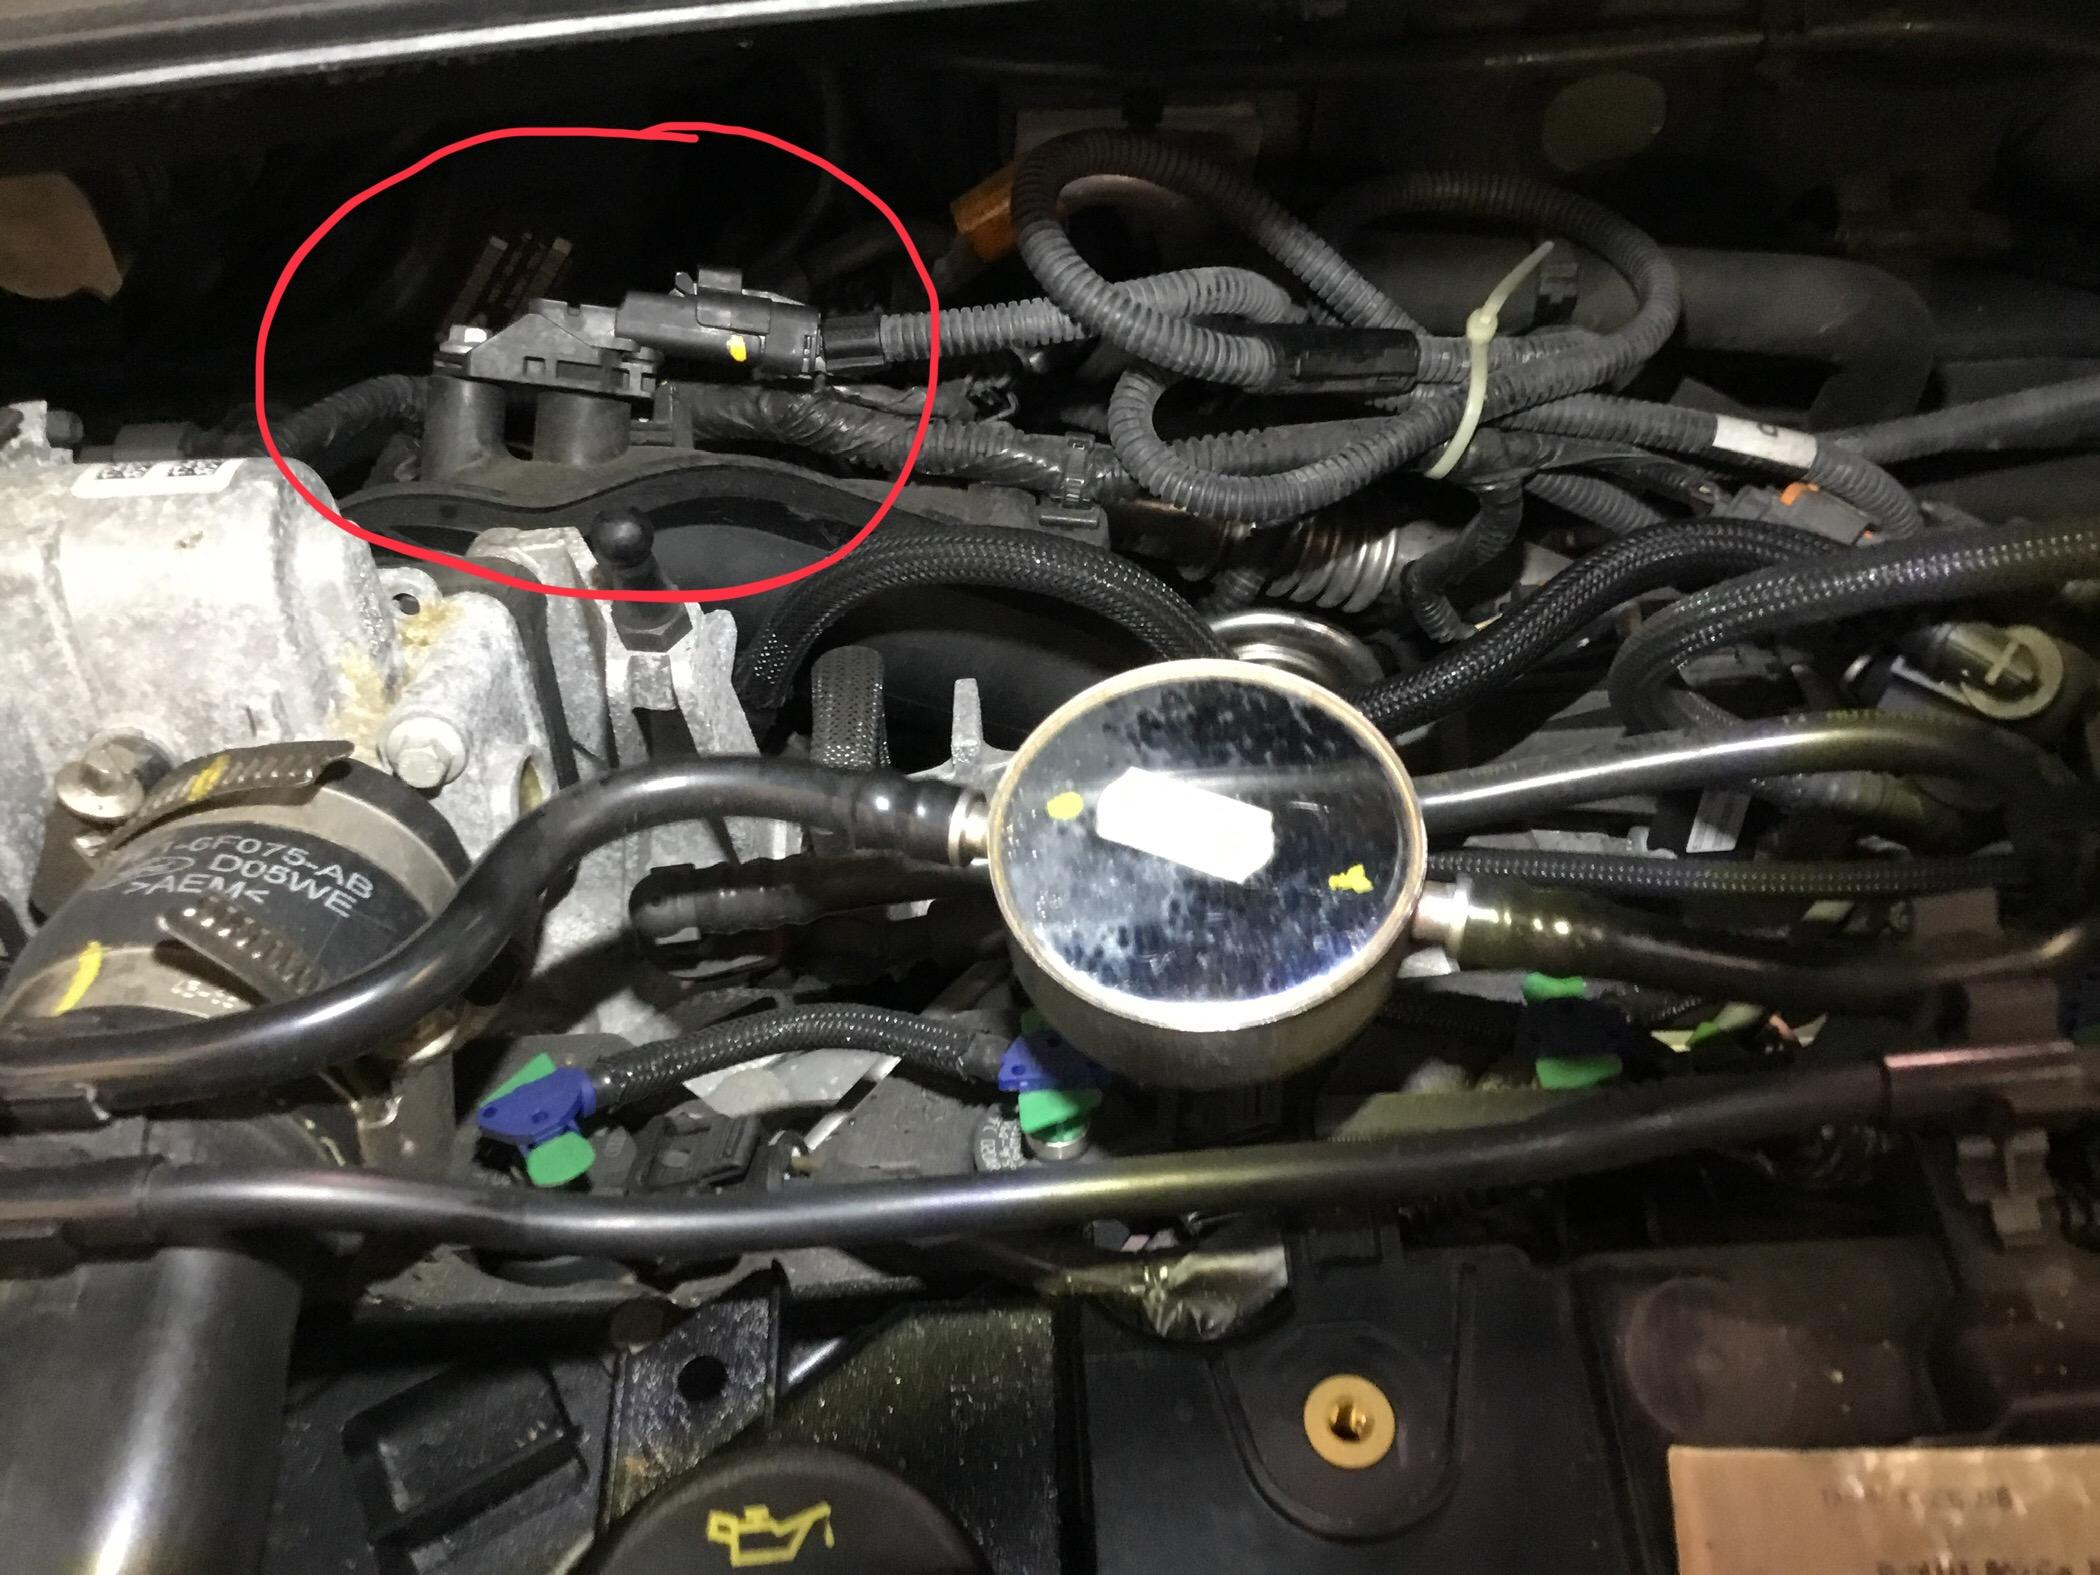 1.5 tdci unknown part? - Ford Focus Club - Ford Owners Club - Ford Forums 2000 Ford Focus Freeze Plug Location